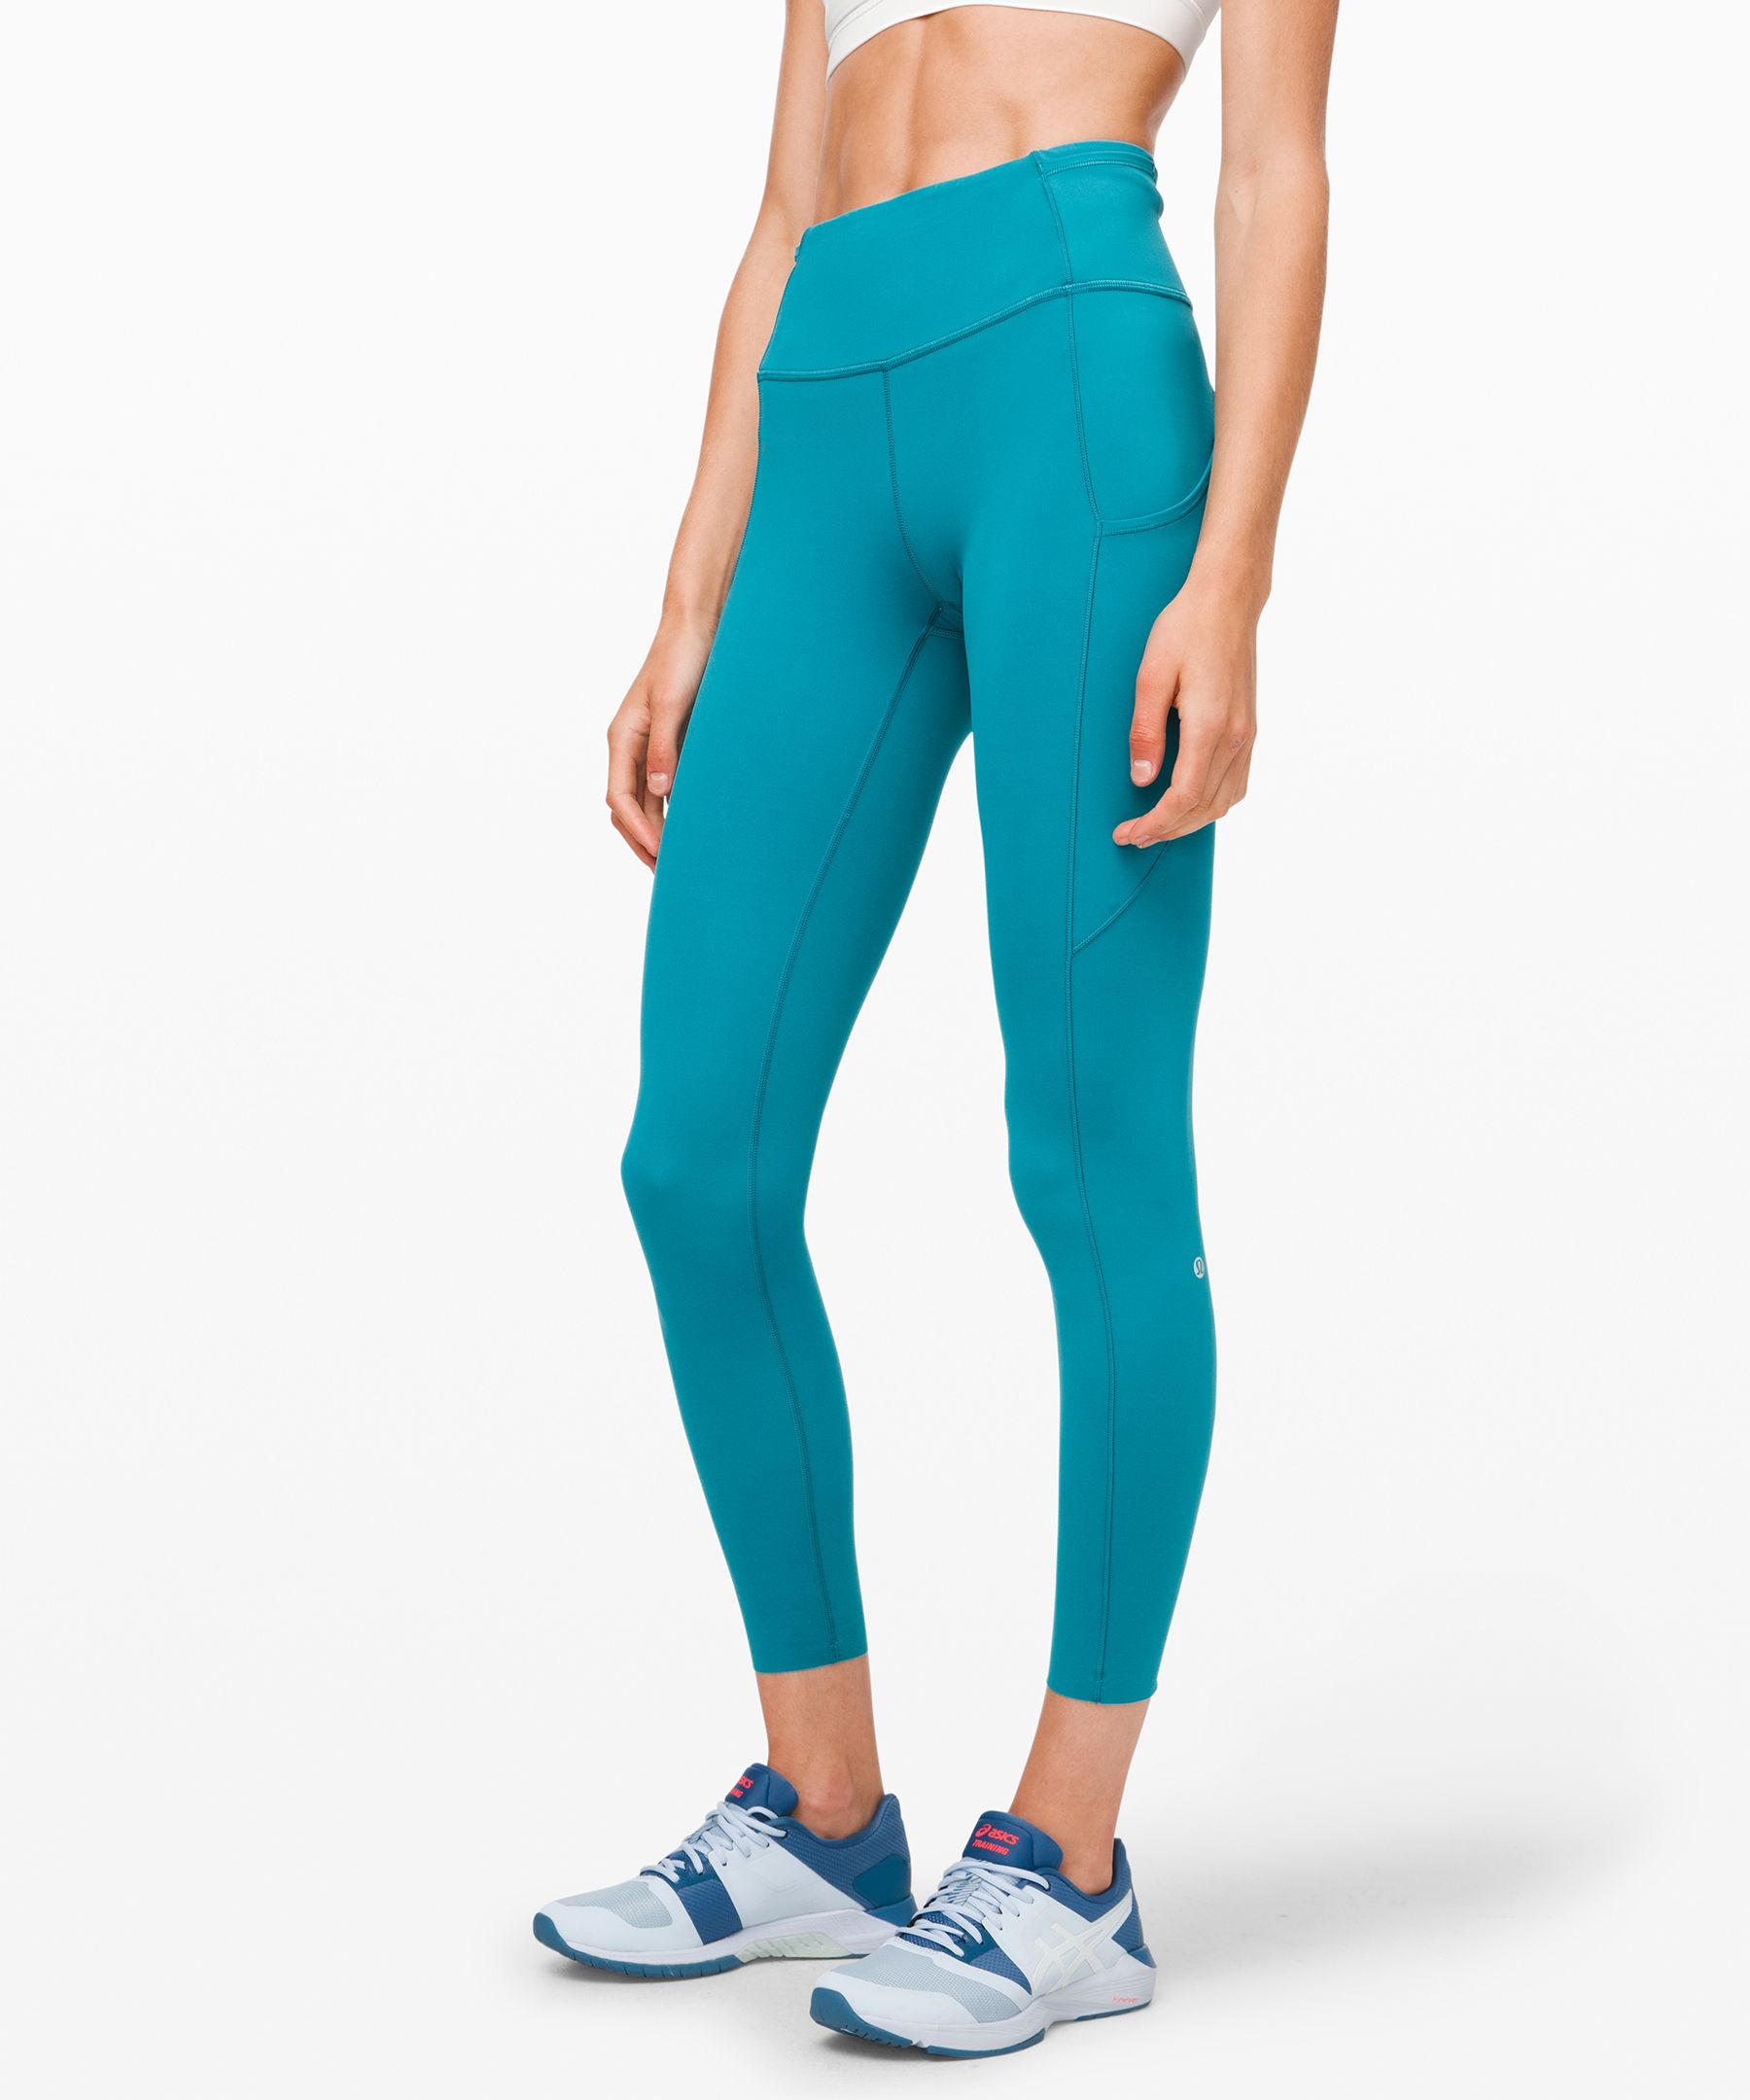 Lululemon Fast and Free High-Rise Tight 25 *Nulux - Symphony Blue